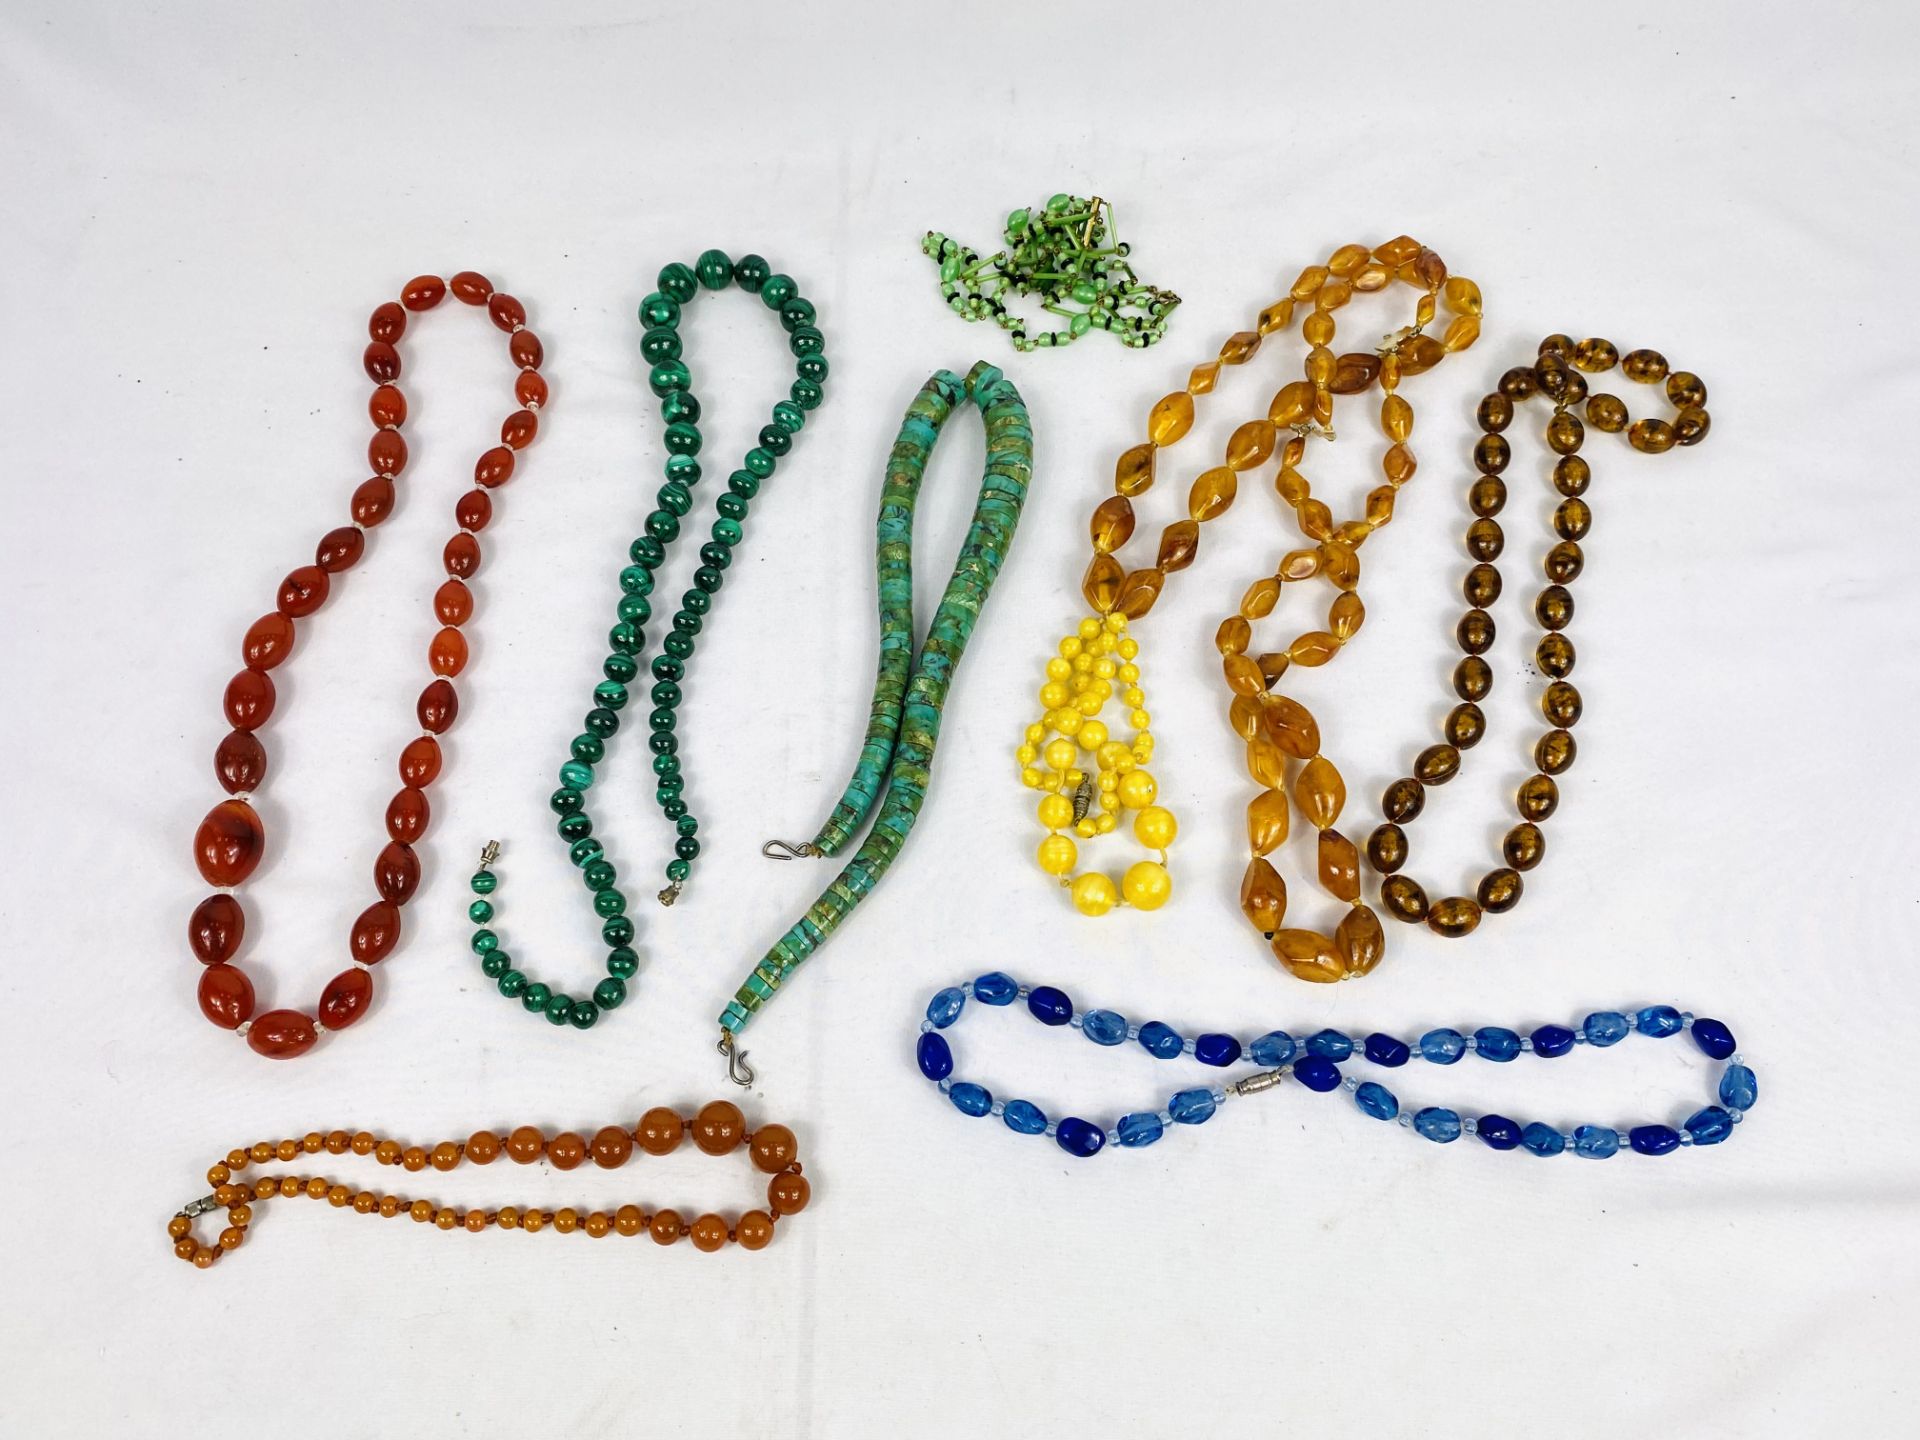 A malachite bead necklace together with a quantity of other bead necklaces